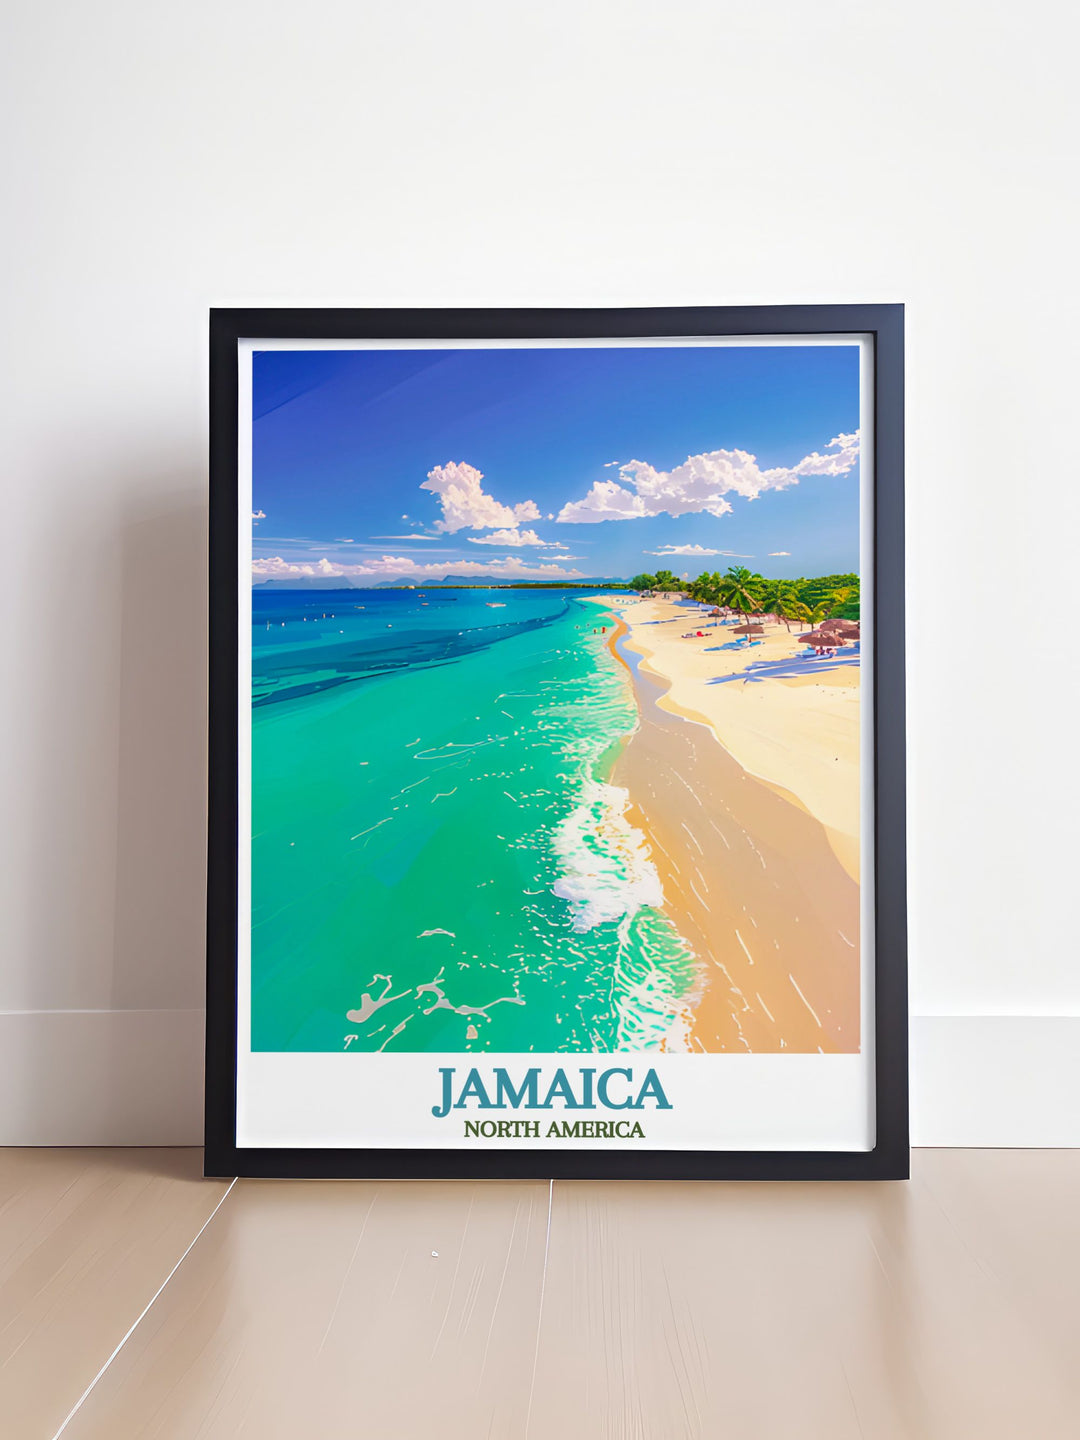 Showcasing Jamaicas iconic Seven Mile Beach, this poster captures the essence of the islands stunning natural beauty and relaxing environment.